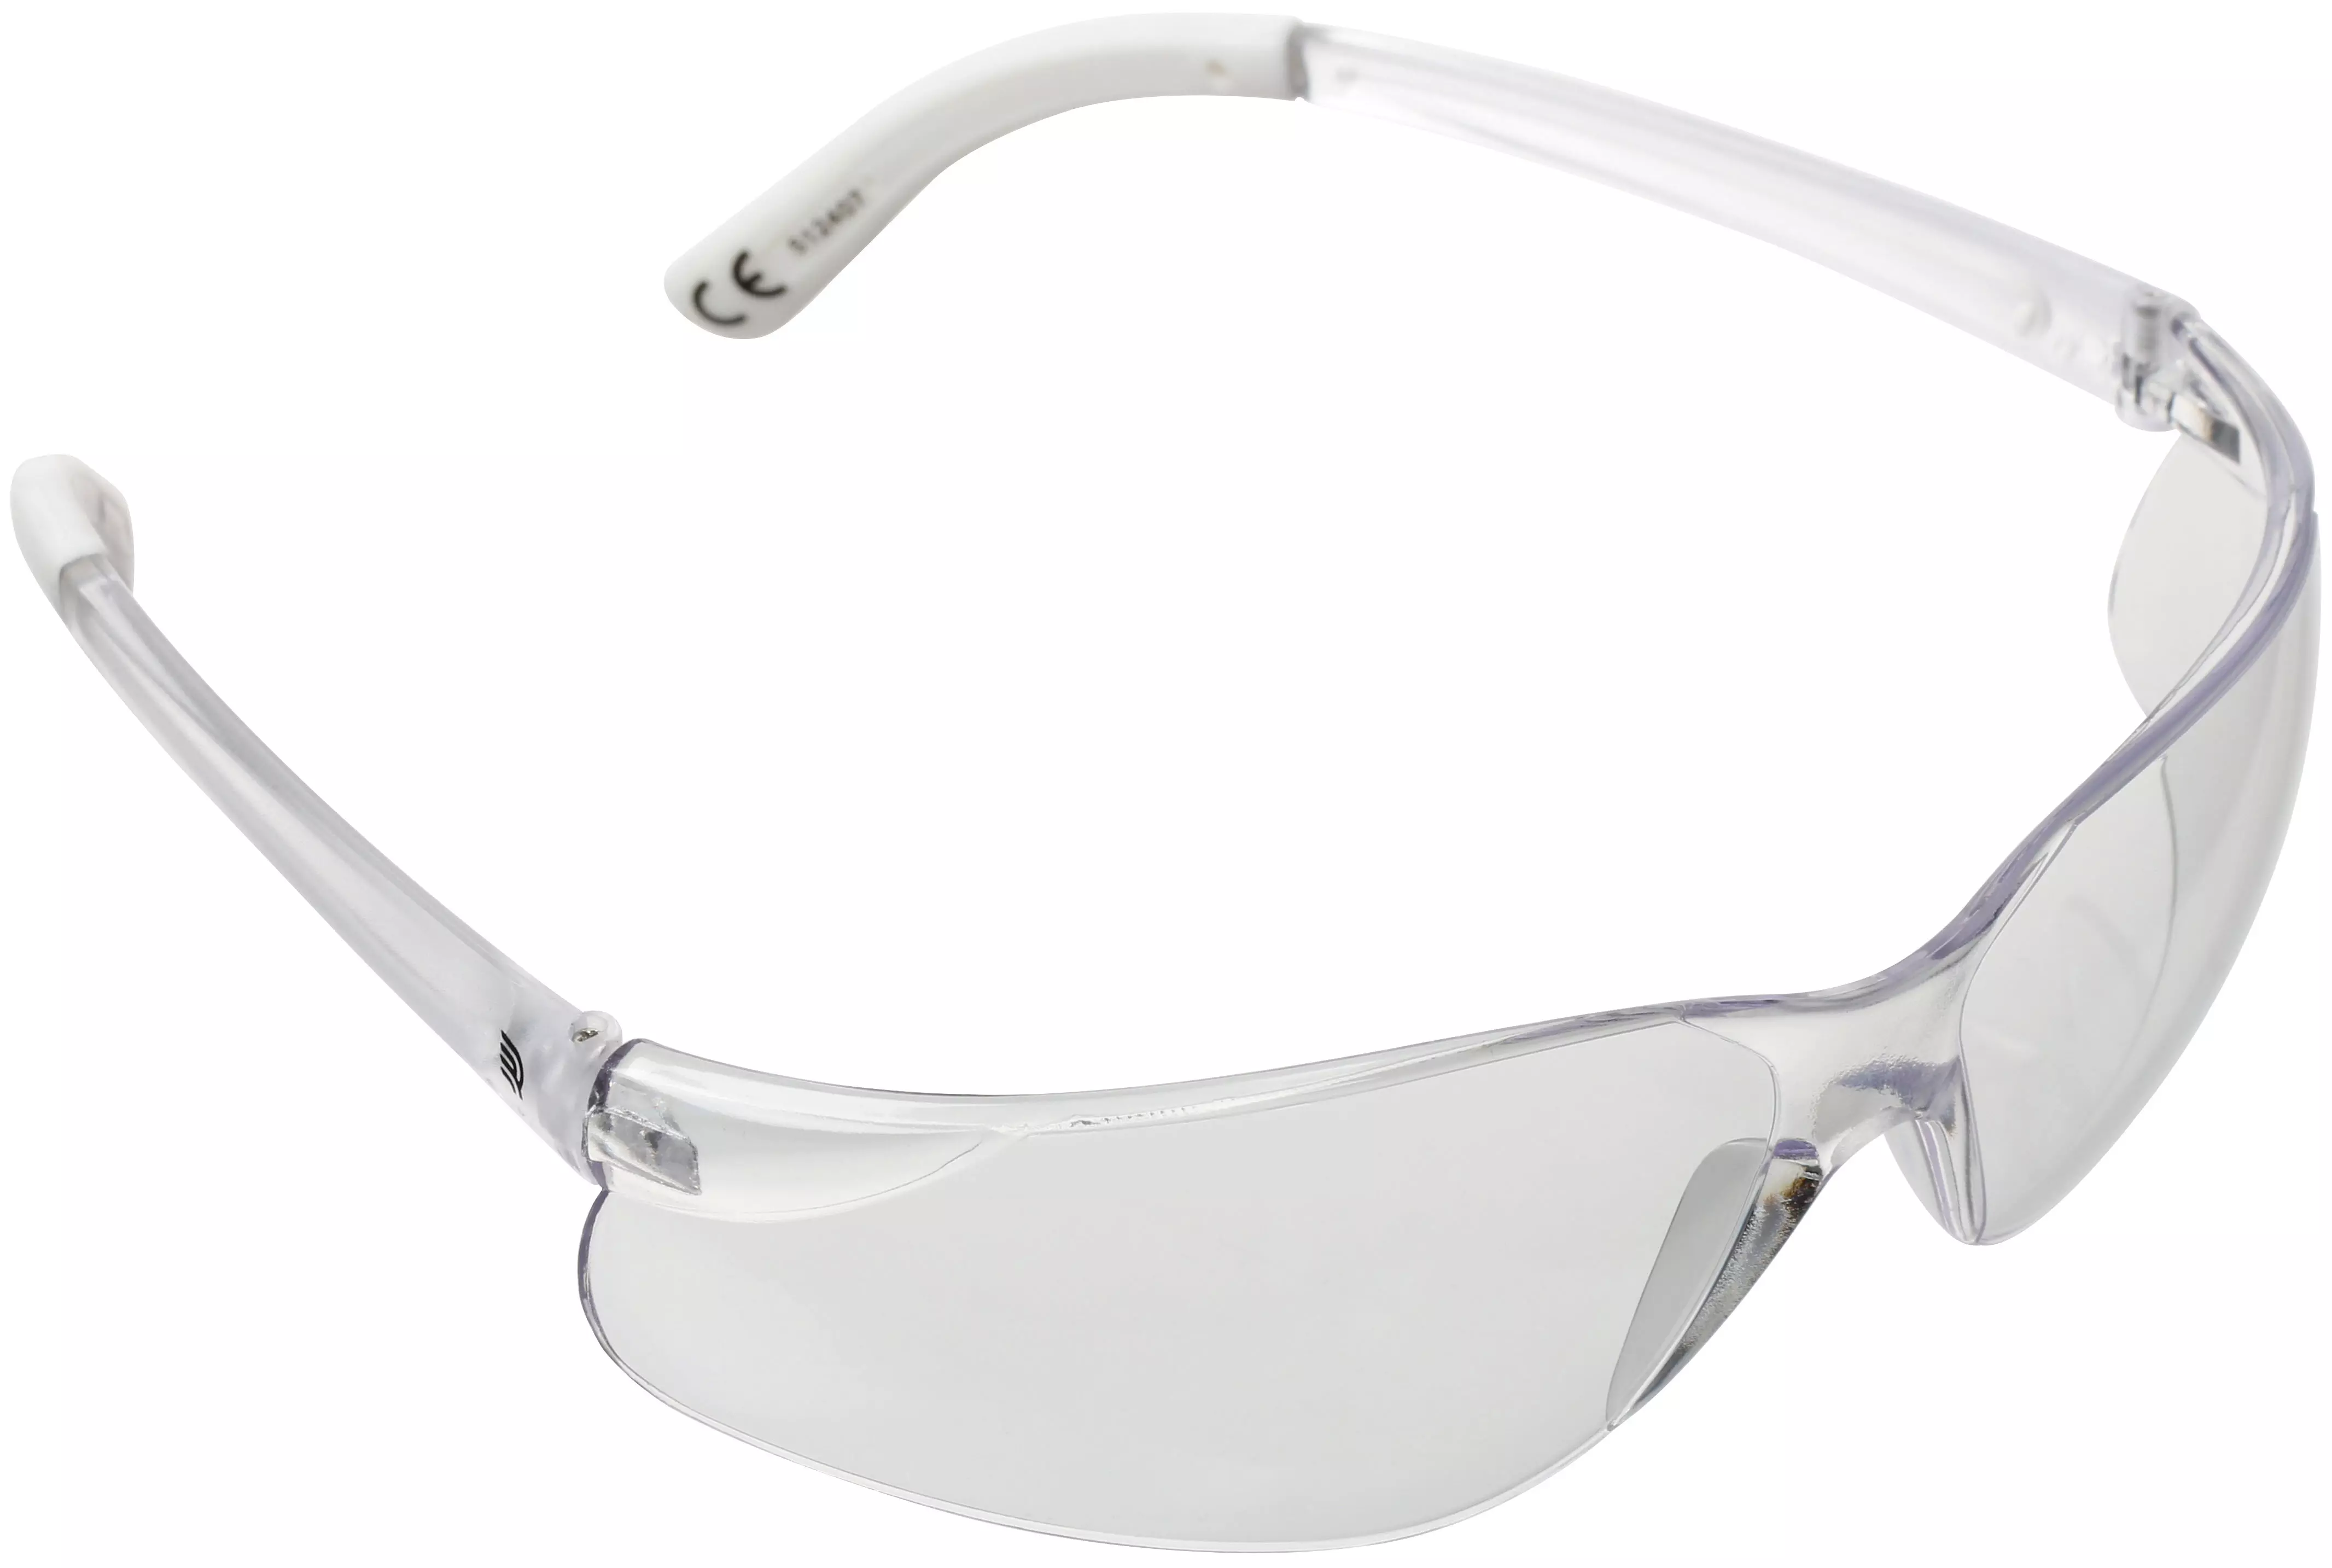 where to buy clear lens glasses